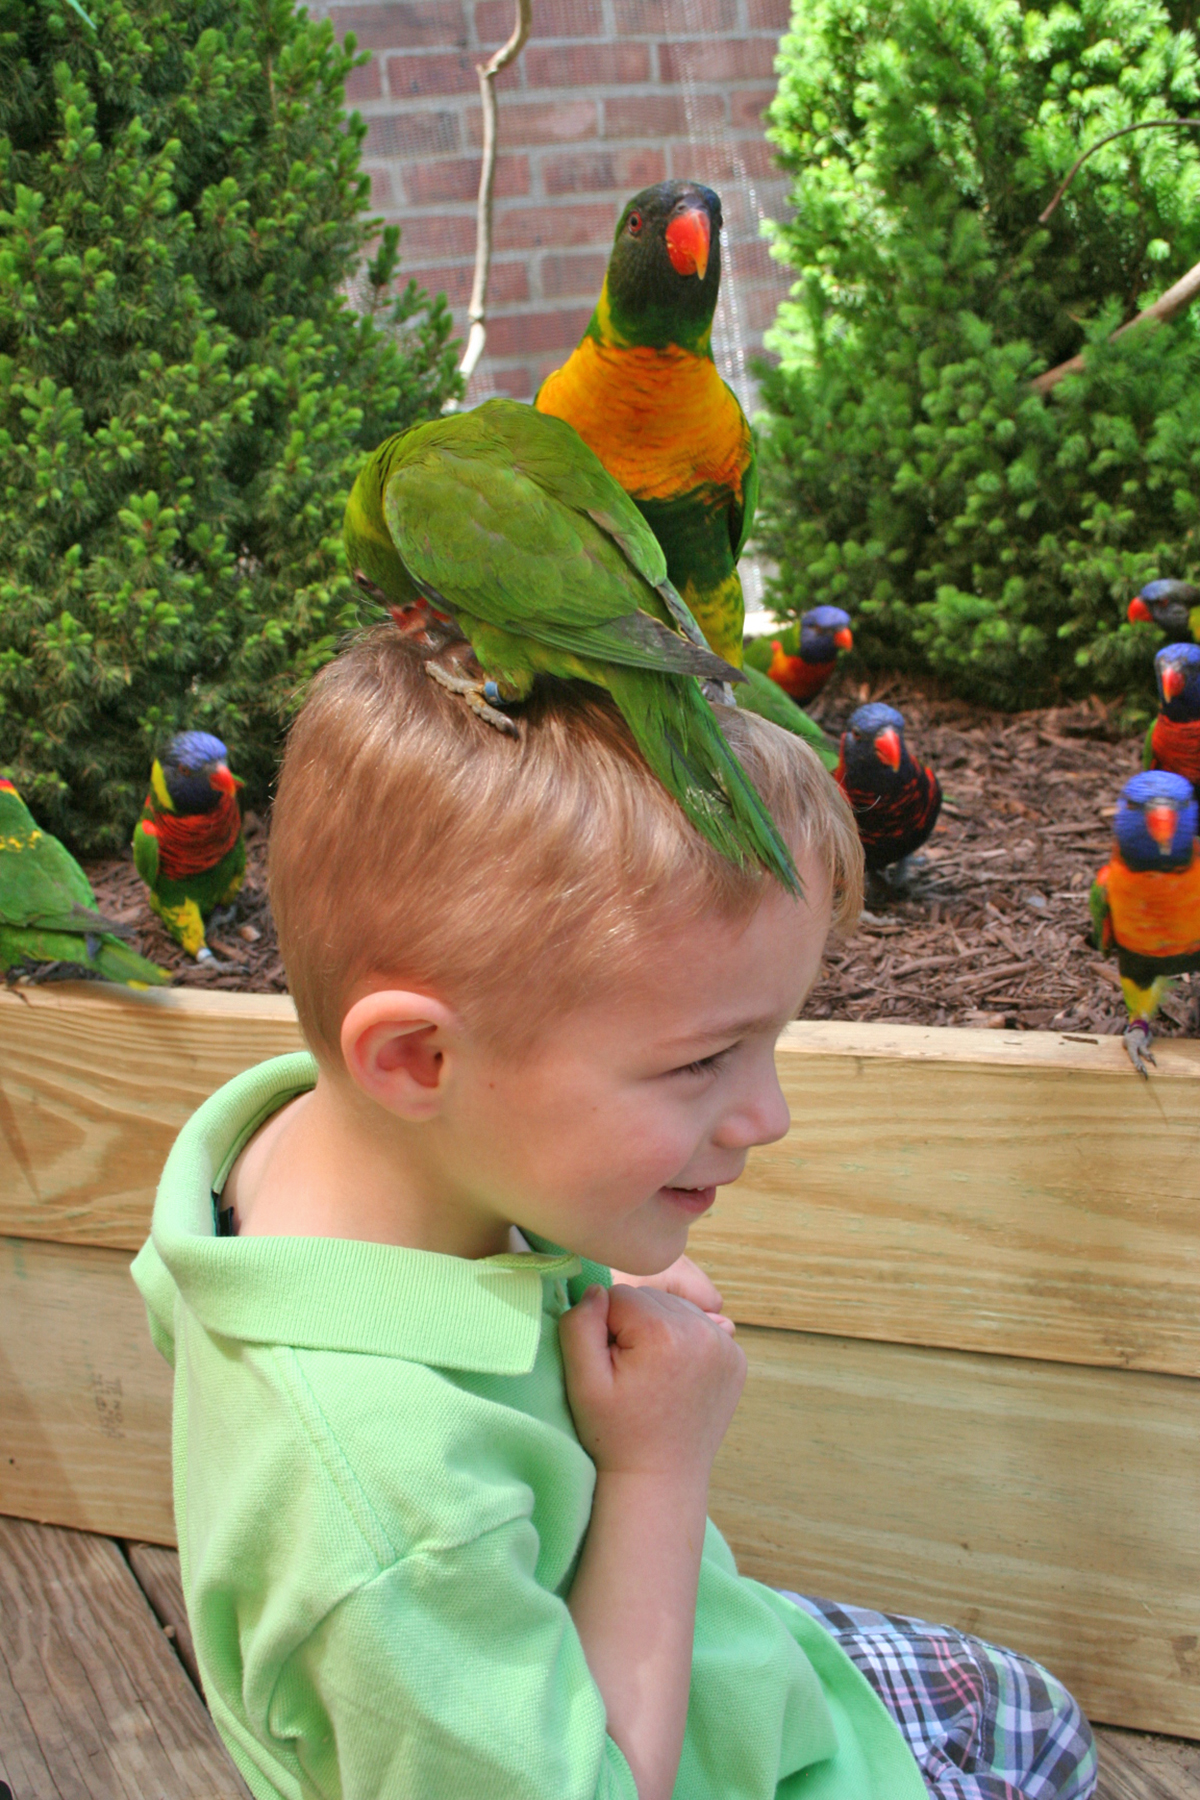 Birds may land on your hand, arm or even on your head in "Lorikeets," a fun summer exhibit at The Maritime Aquarium at Norwalk.